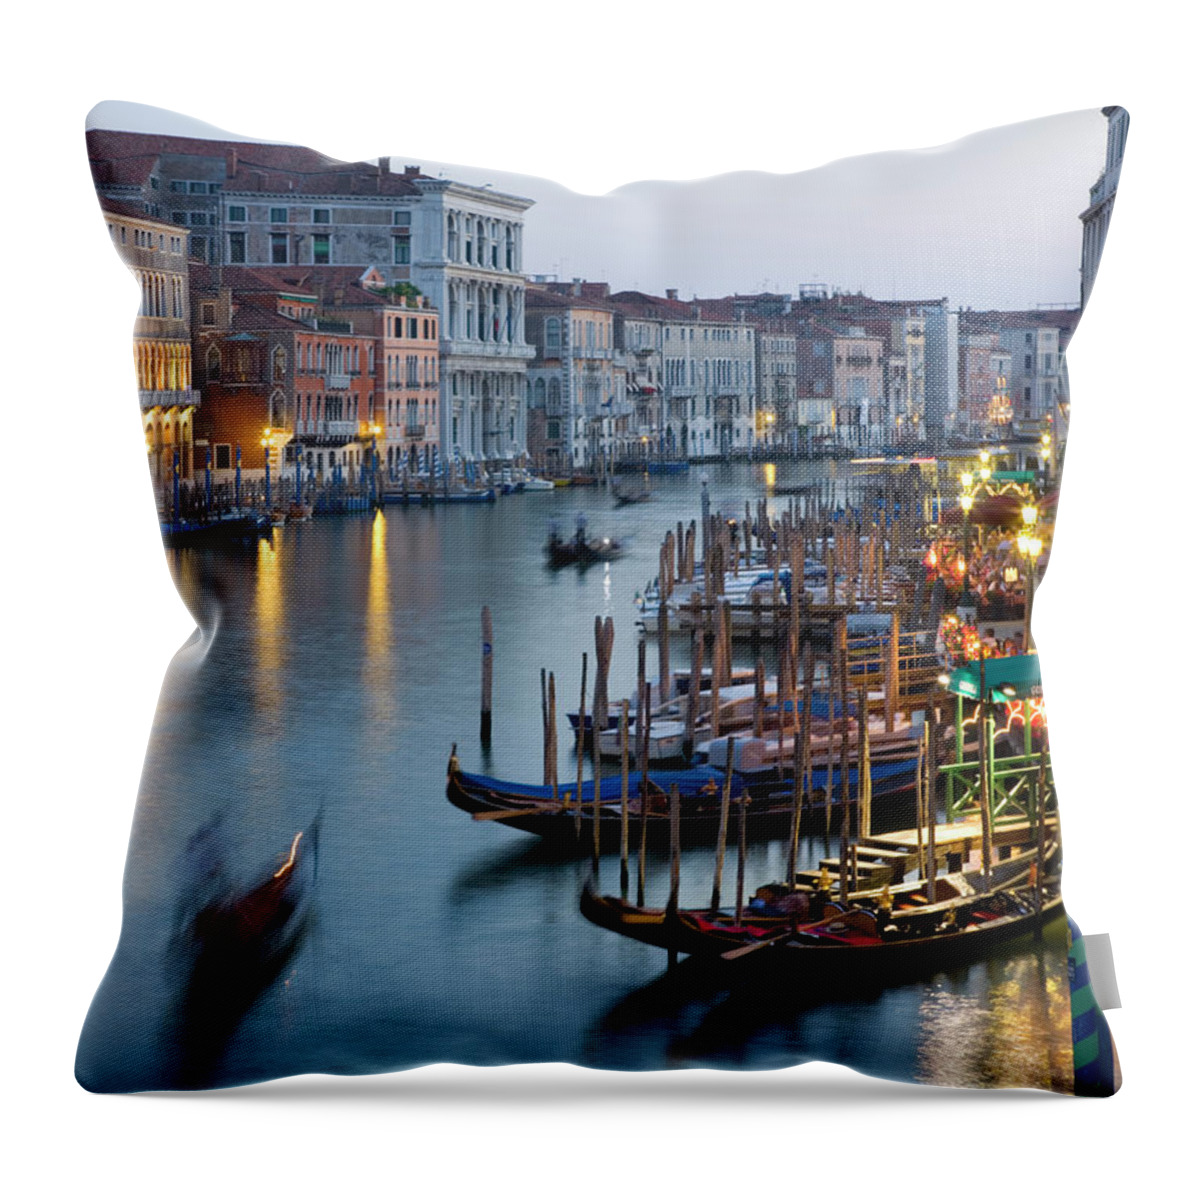 Forecasting Throw Pillow featuring the photograph Outlook From Ponte Di Rialto Along by David C Tomlinson